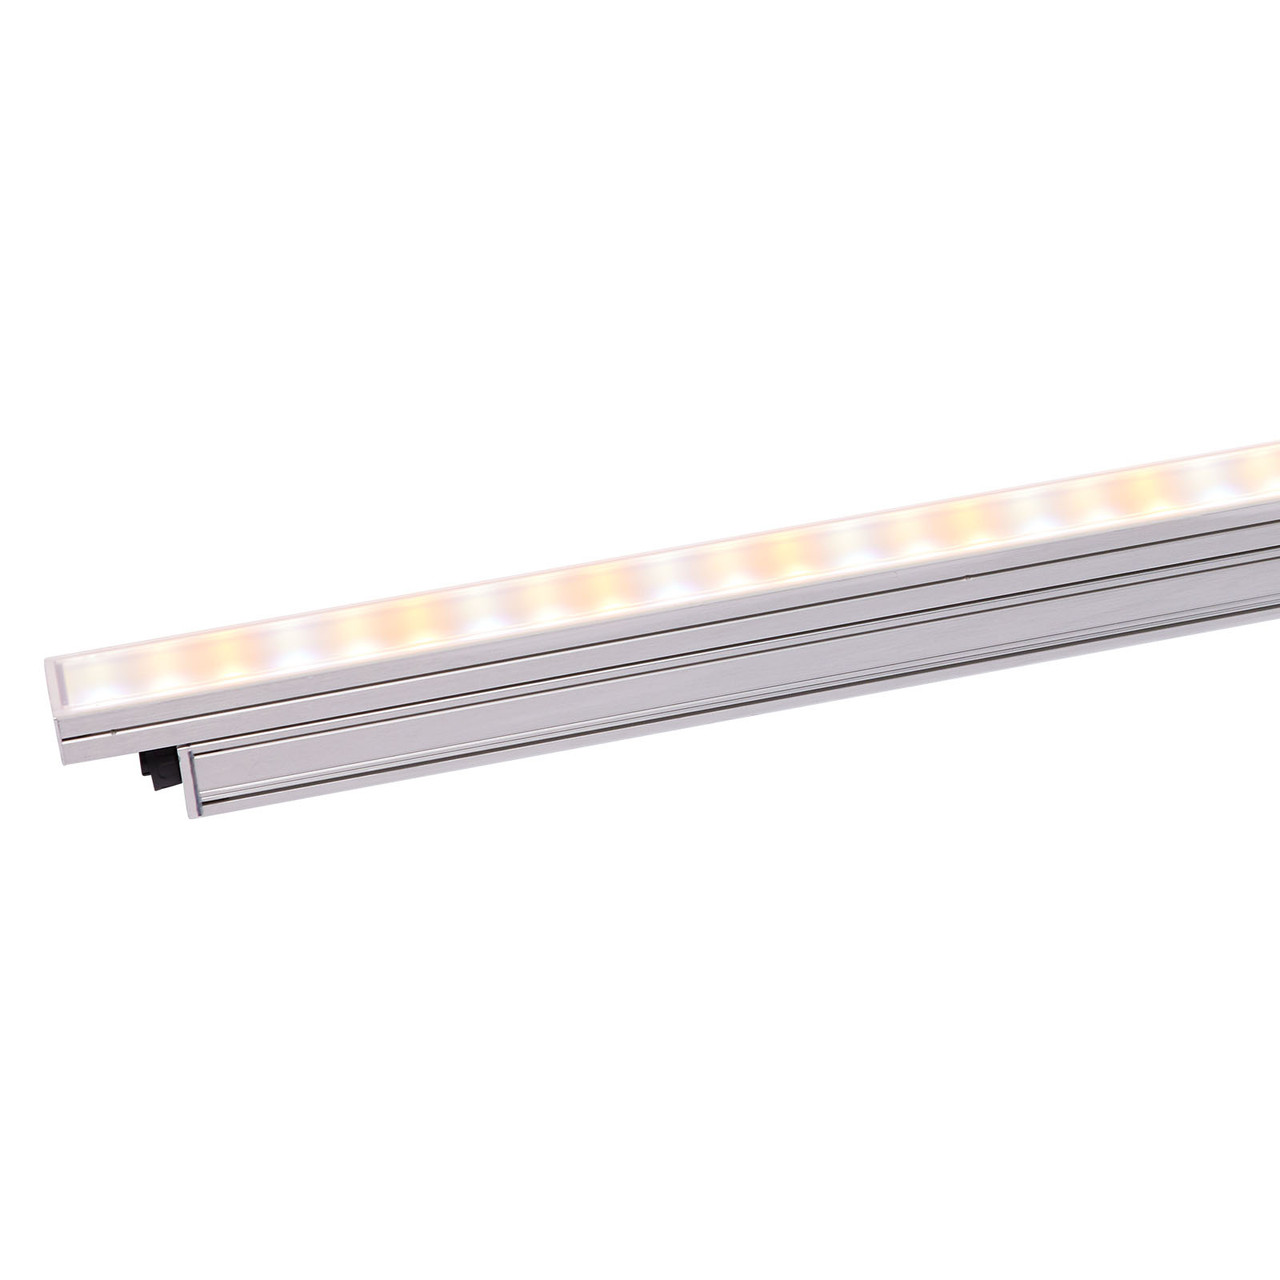 Martin Lighting Exterior Linear Pro Cove CTC Outdoor Linear Cove Fixture with Color Temperature Control (MAR-90570007-)